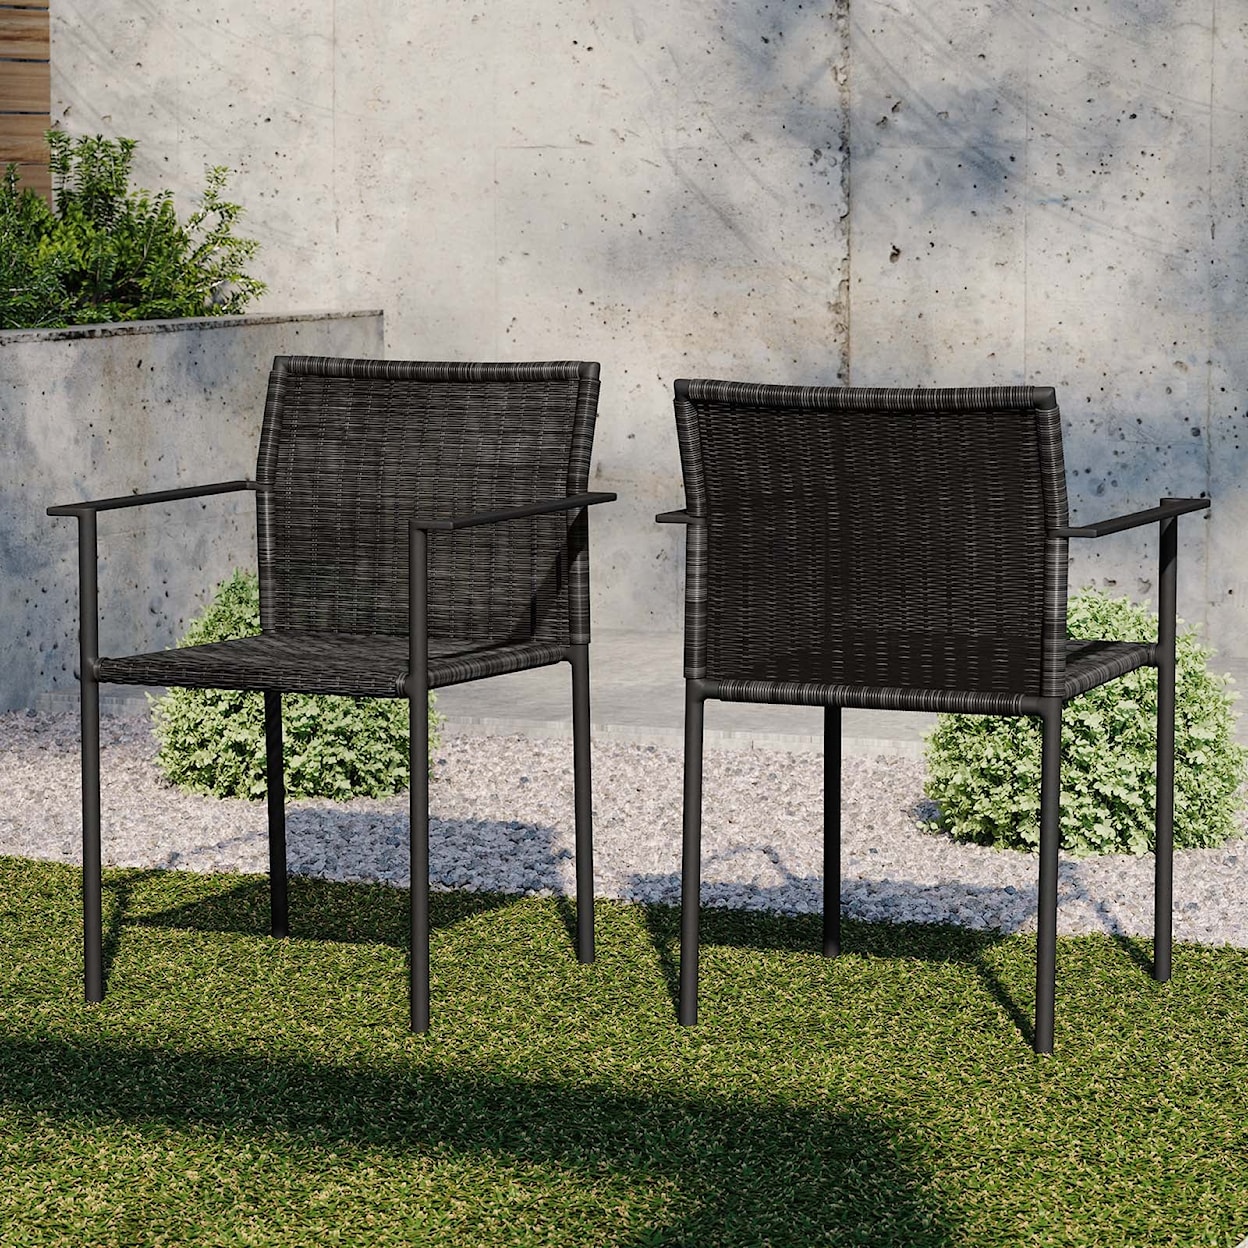 Modway Lagoon Outdoor Patio Dining Armchairs Set of 2